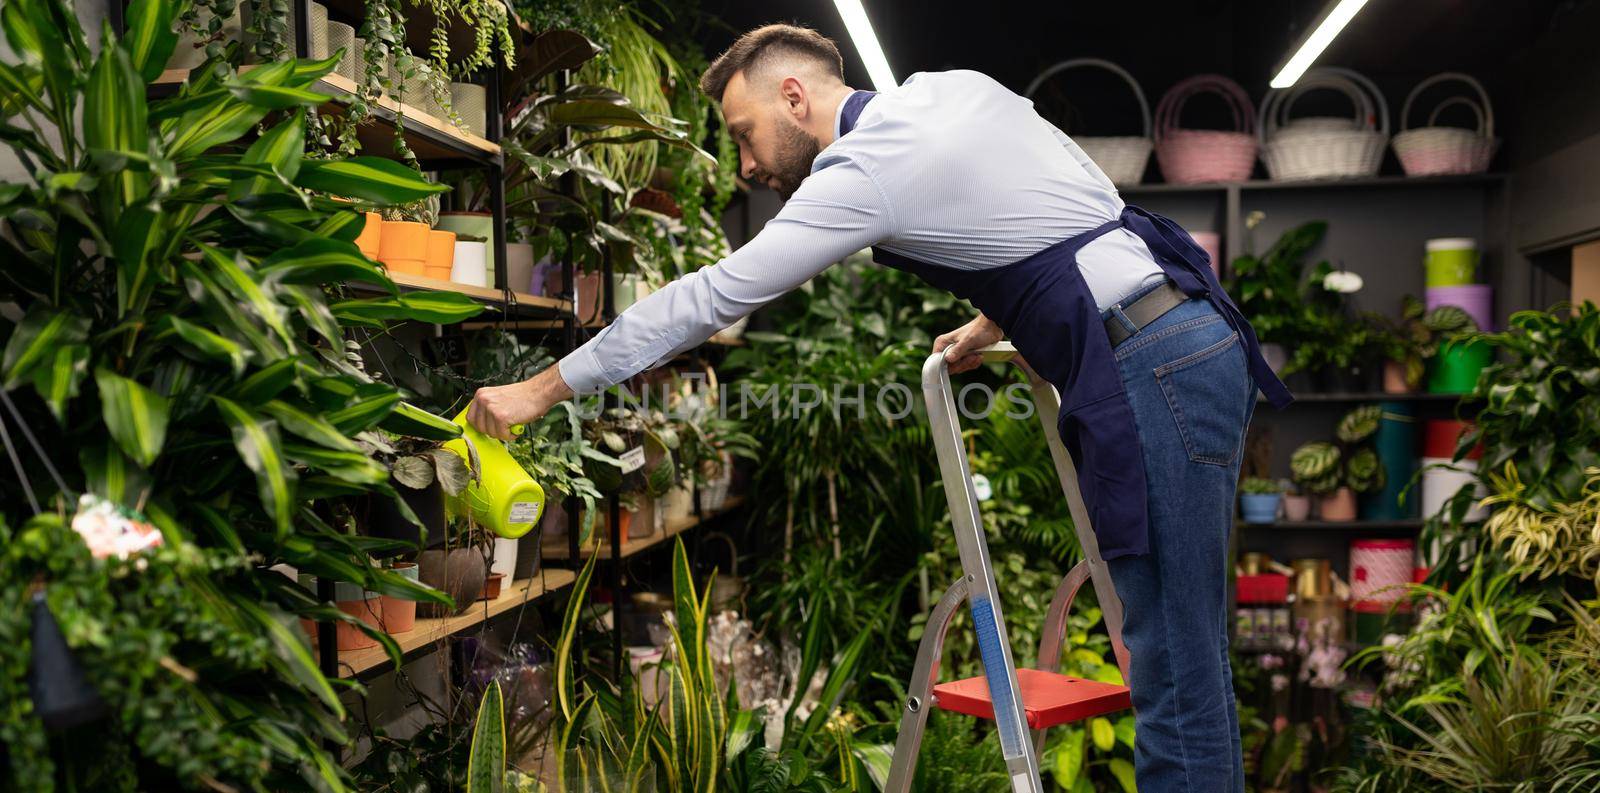 man tending potted plants in a garden shop.